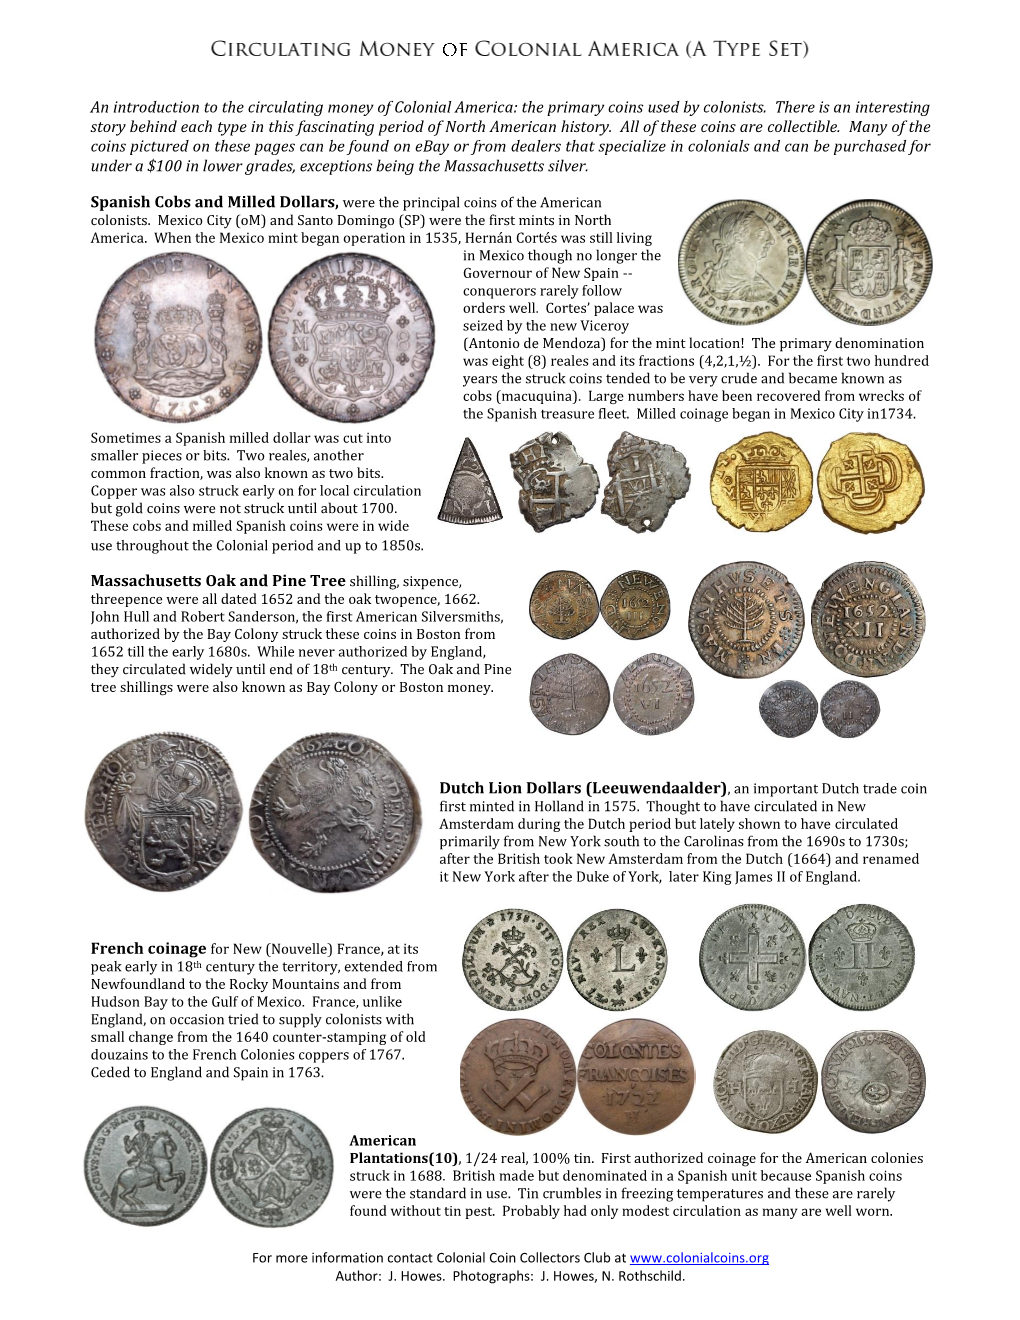 Circulating Money of Colonial America: the Primary Coins Used by Colonists